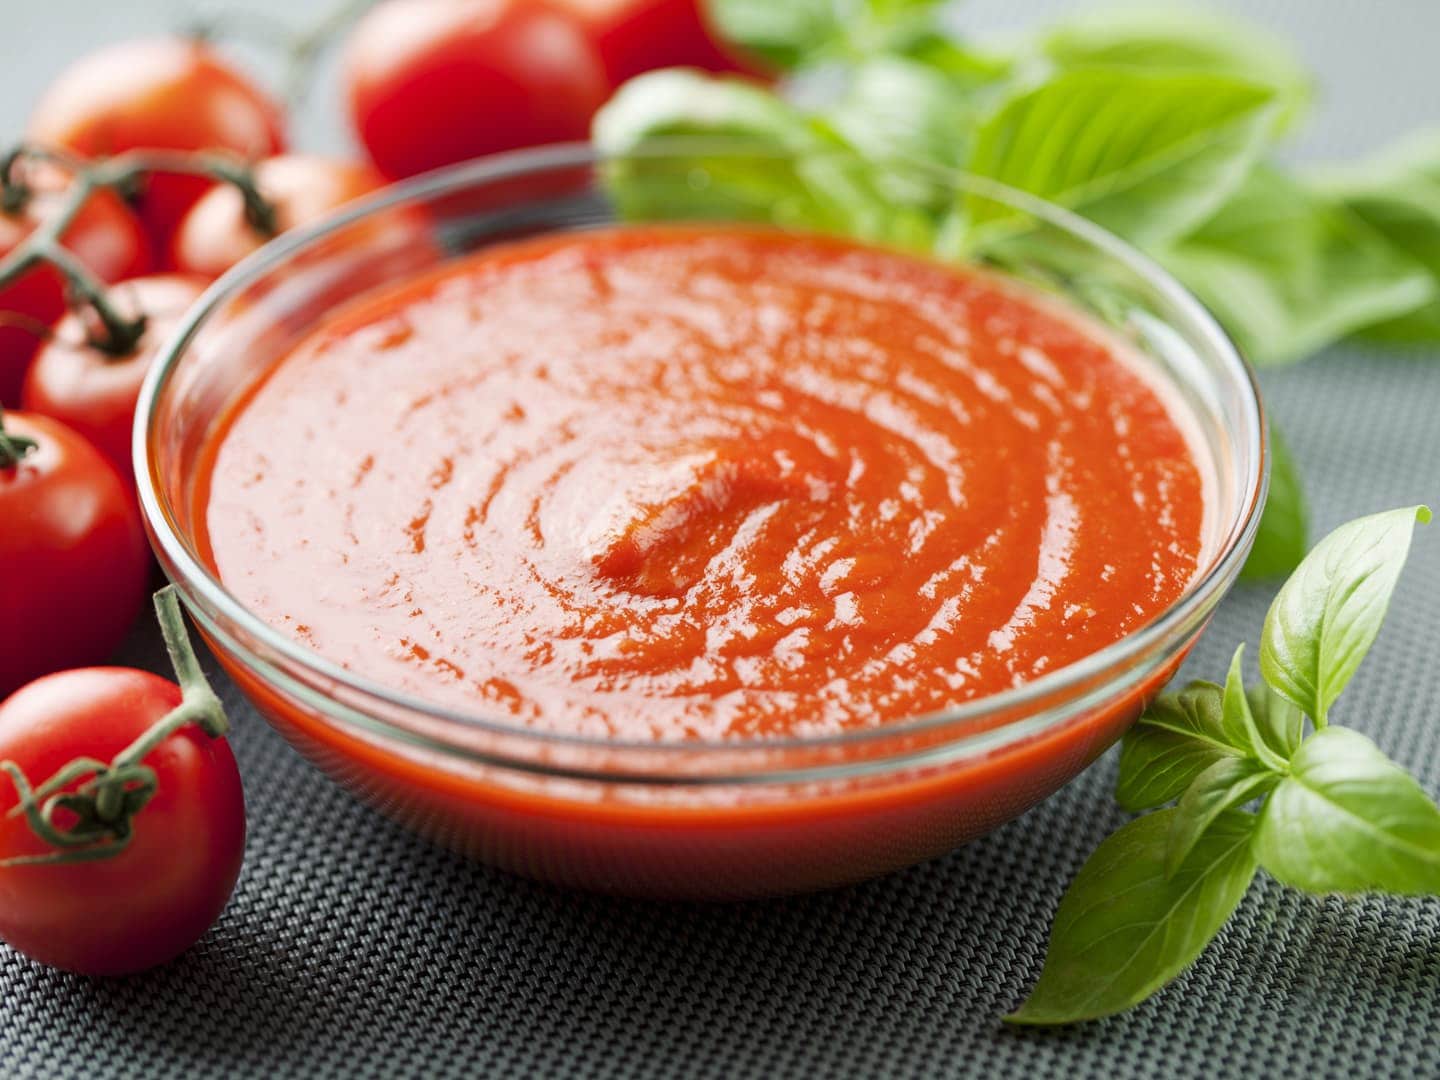 You need to try this authentic Italian tomato sauce recipe.